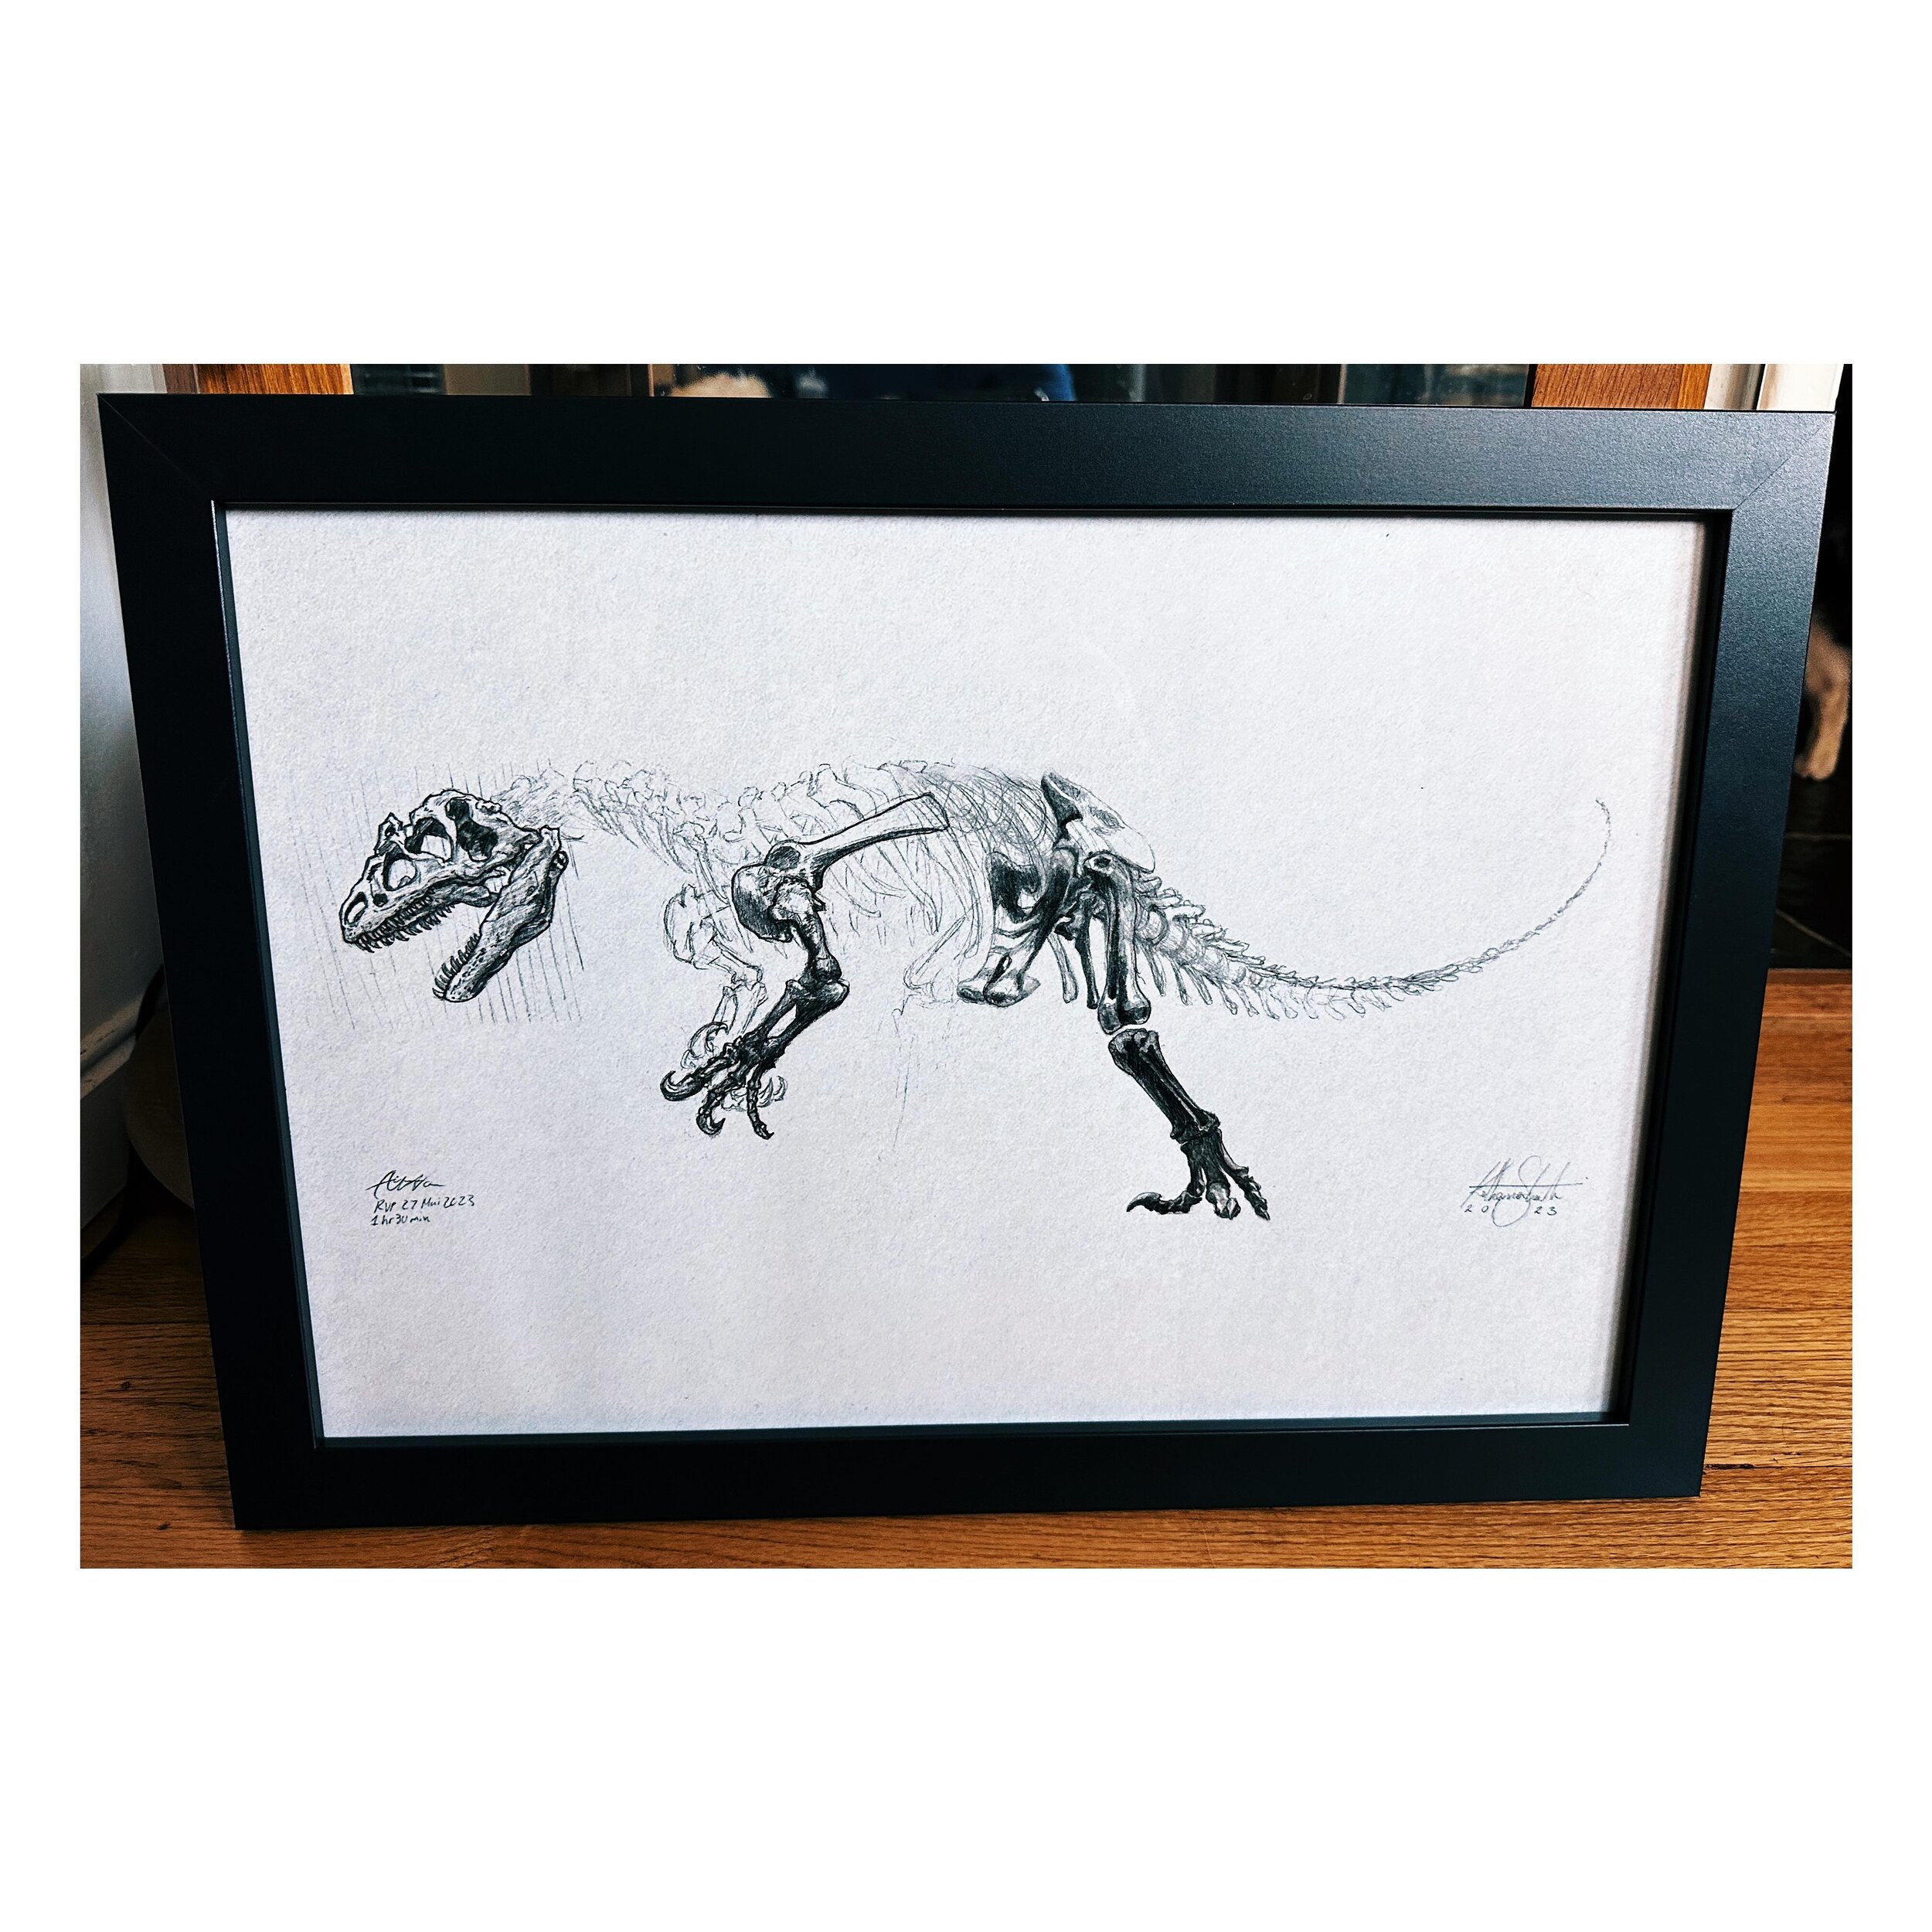 For Valentine&rsquo;s Day, @blakebot5000 printed and framed this awesome combined sketch of the Allosaurus specimen in Belgium (?). What makes this piece extra special is that it was partially sketched by the person I sat next to in the Age of Dinosa